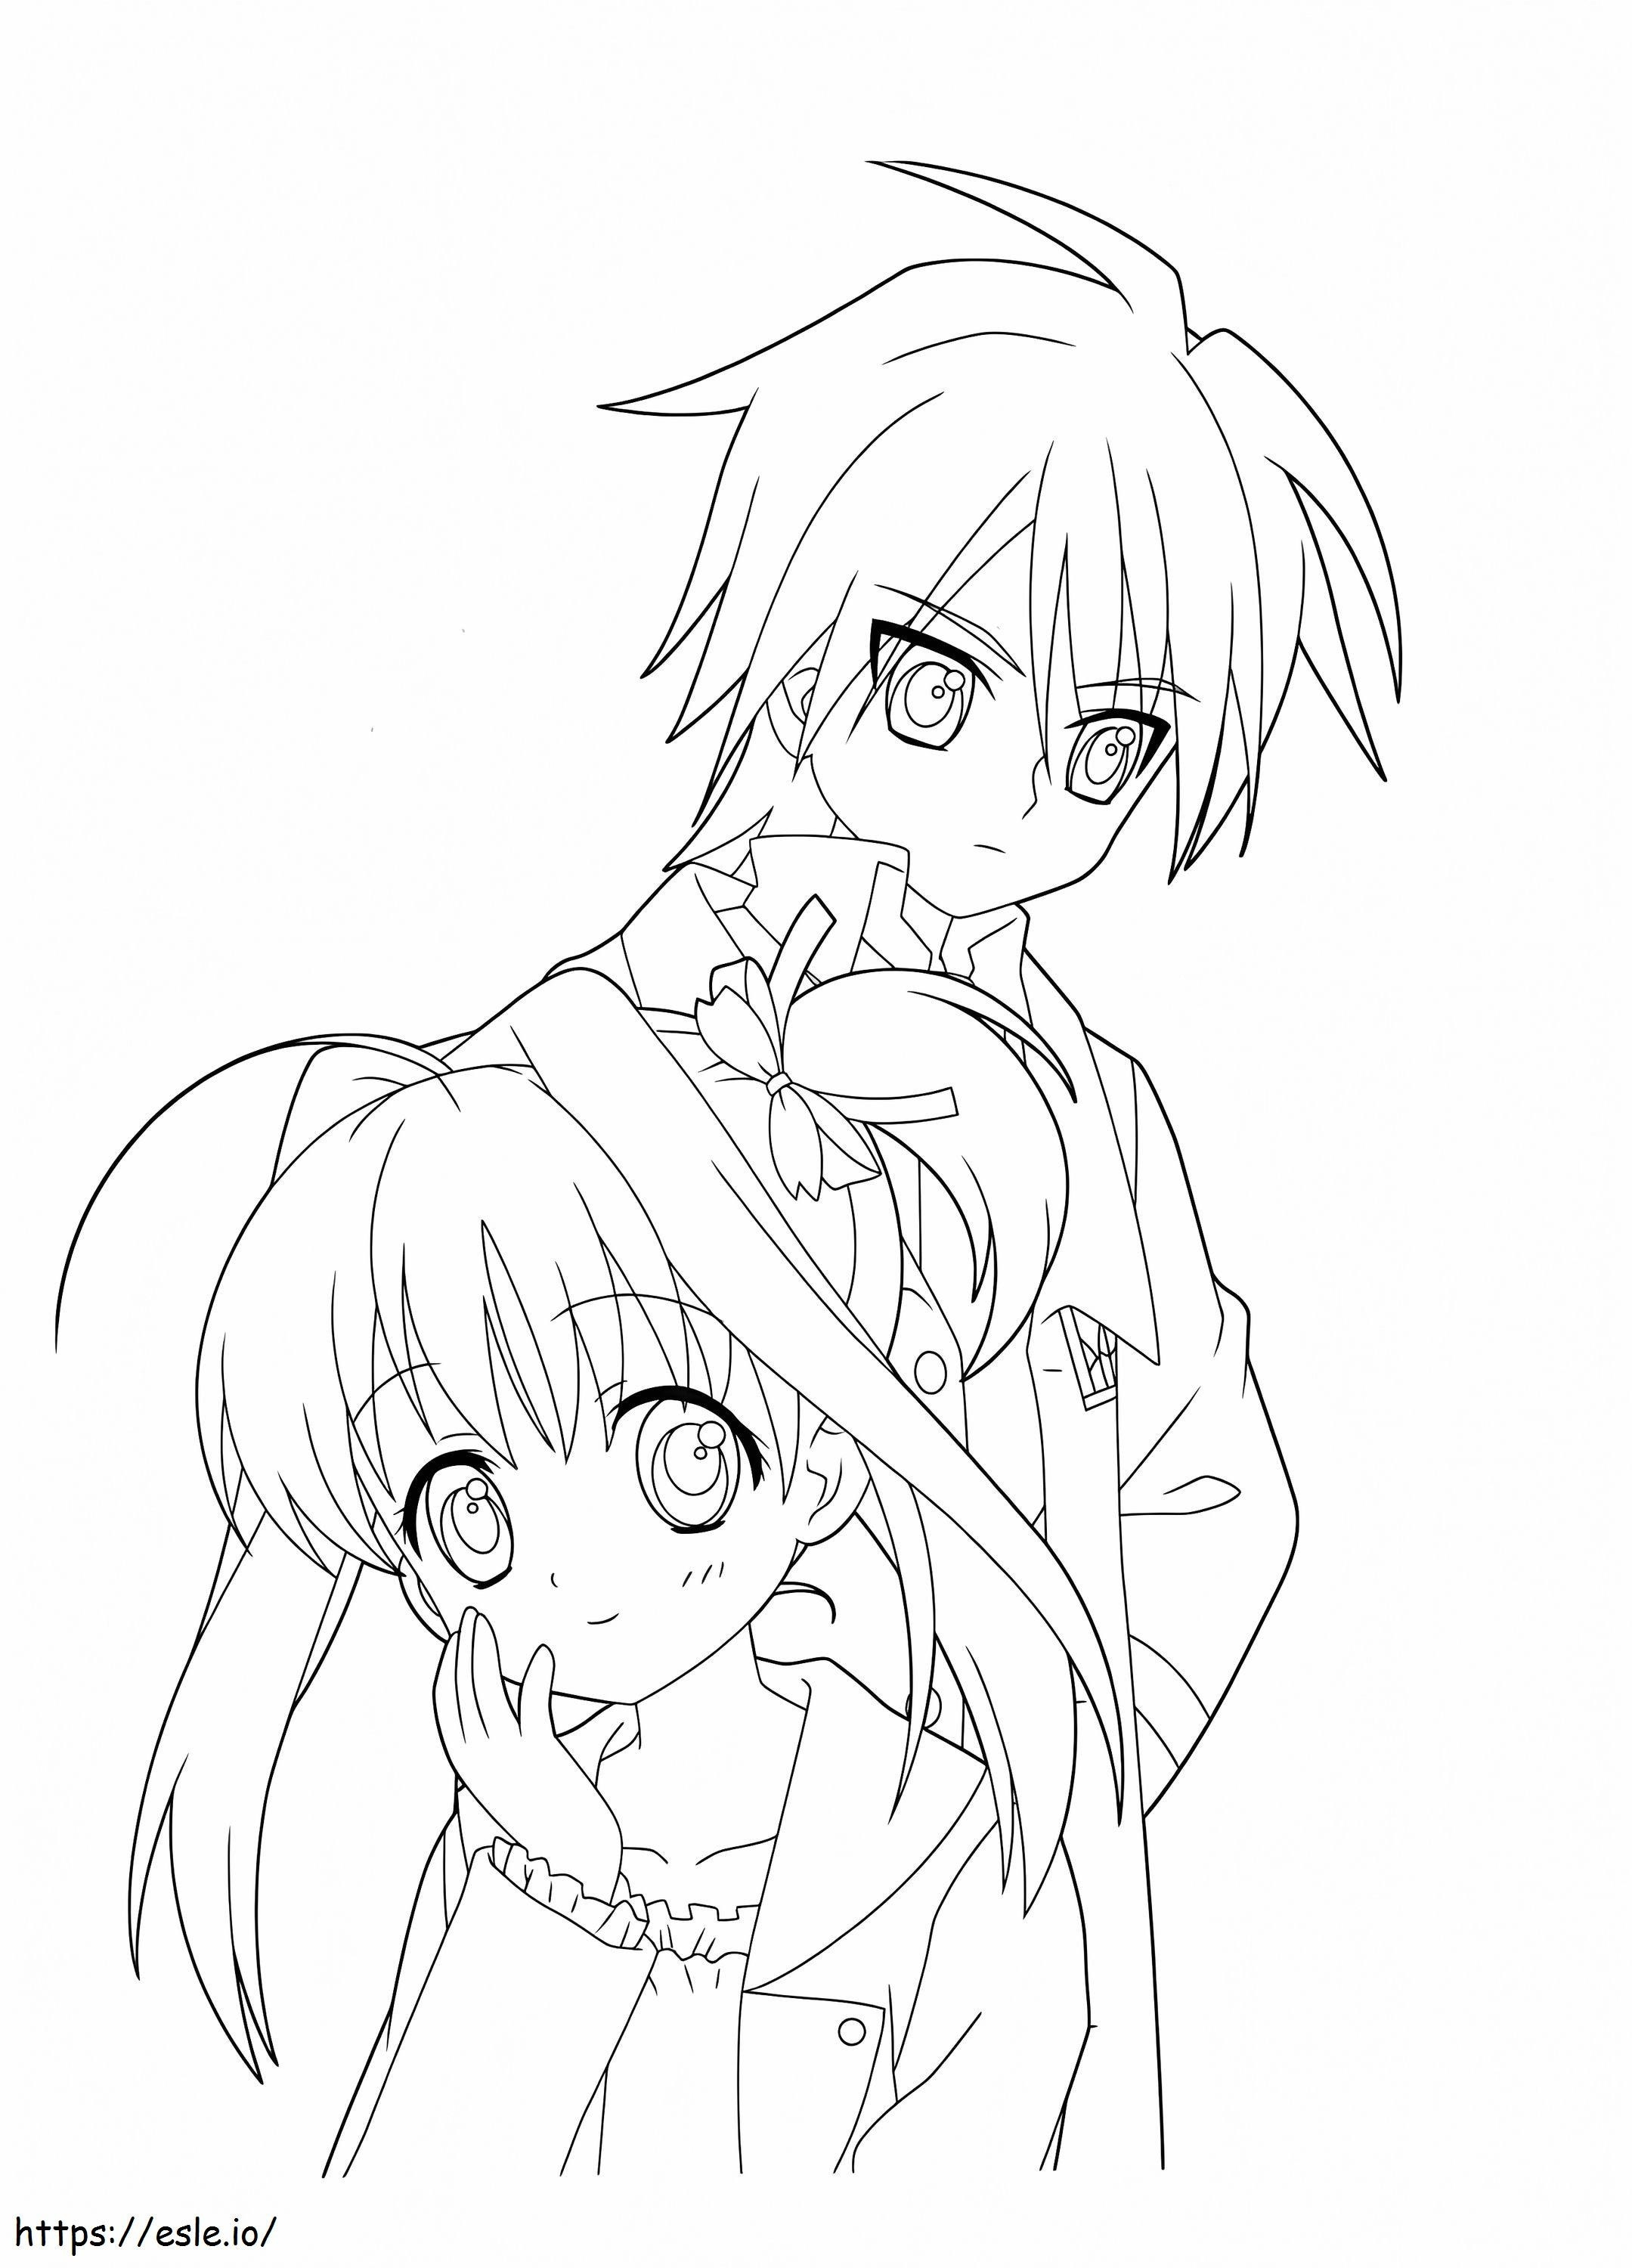 Jewelpets 16 coloring page